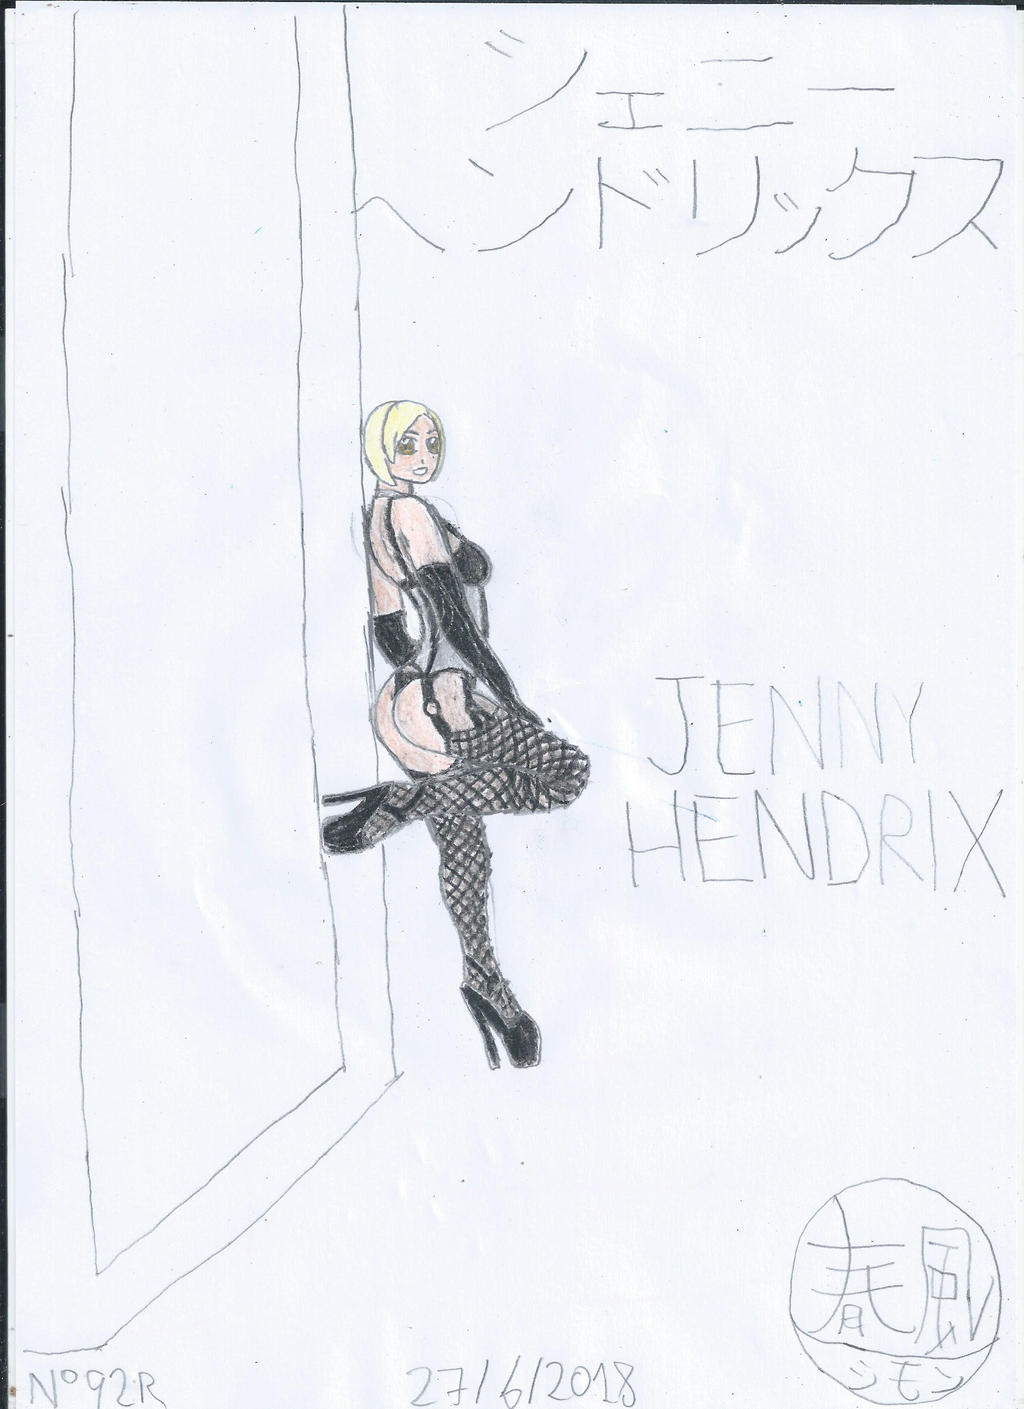 Pictures of Jenny Hendrix